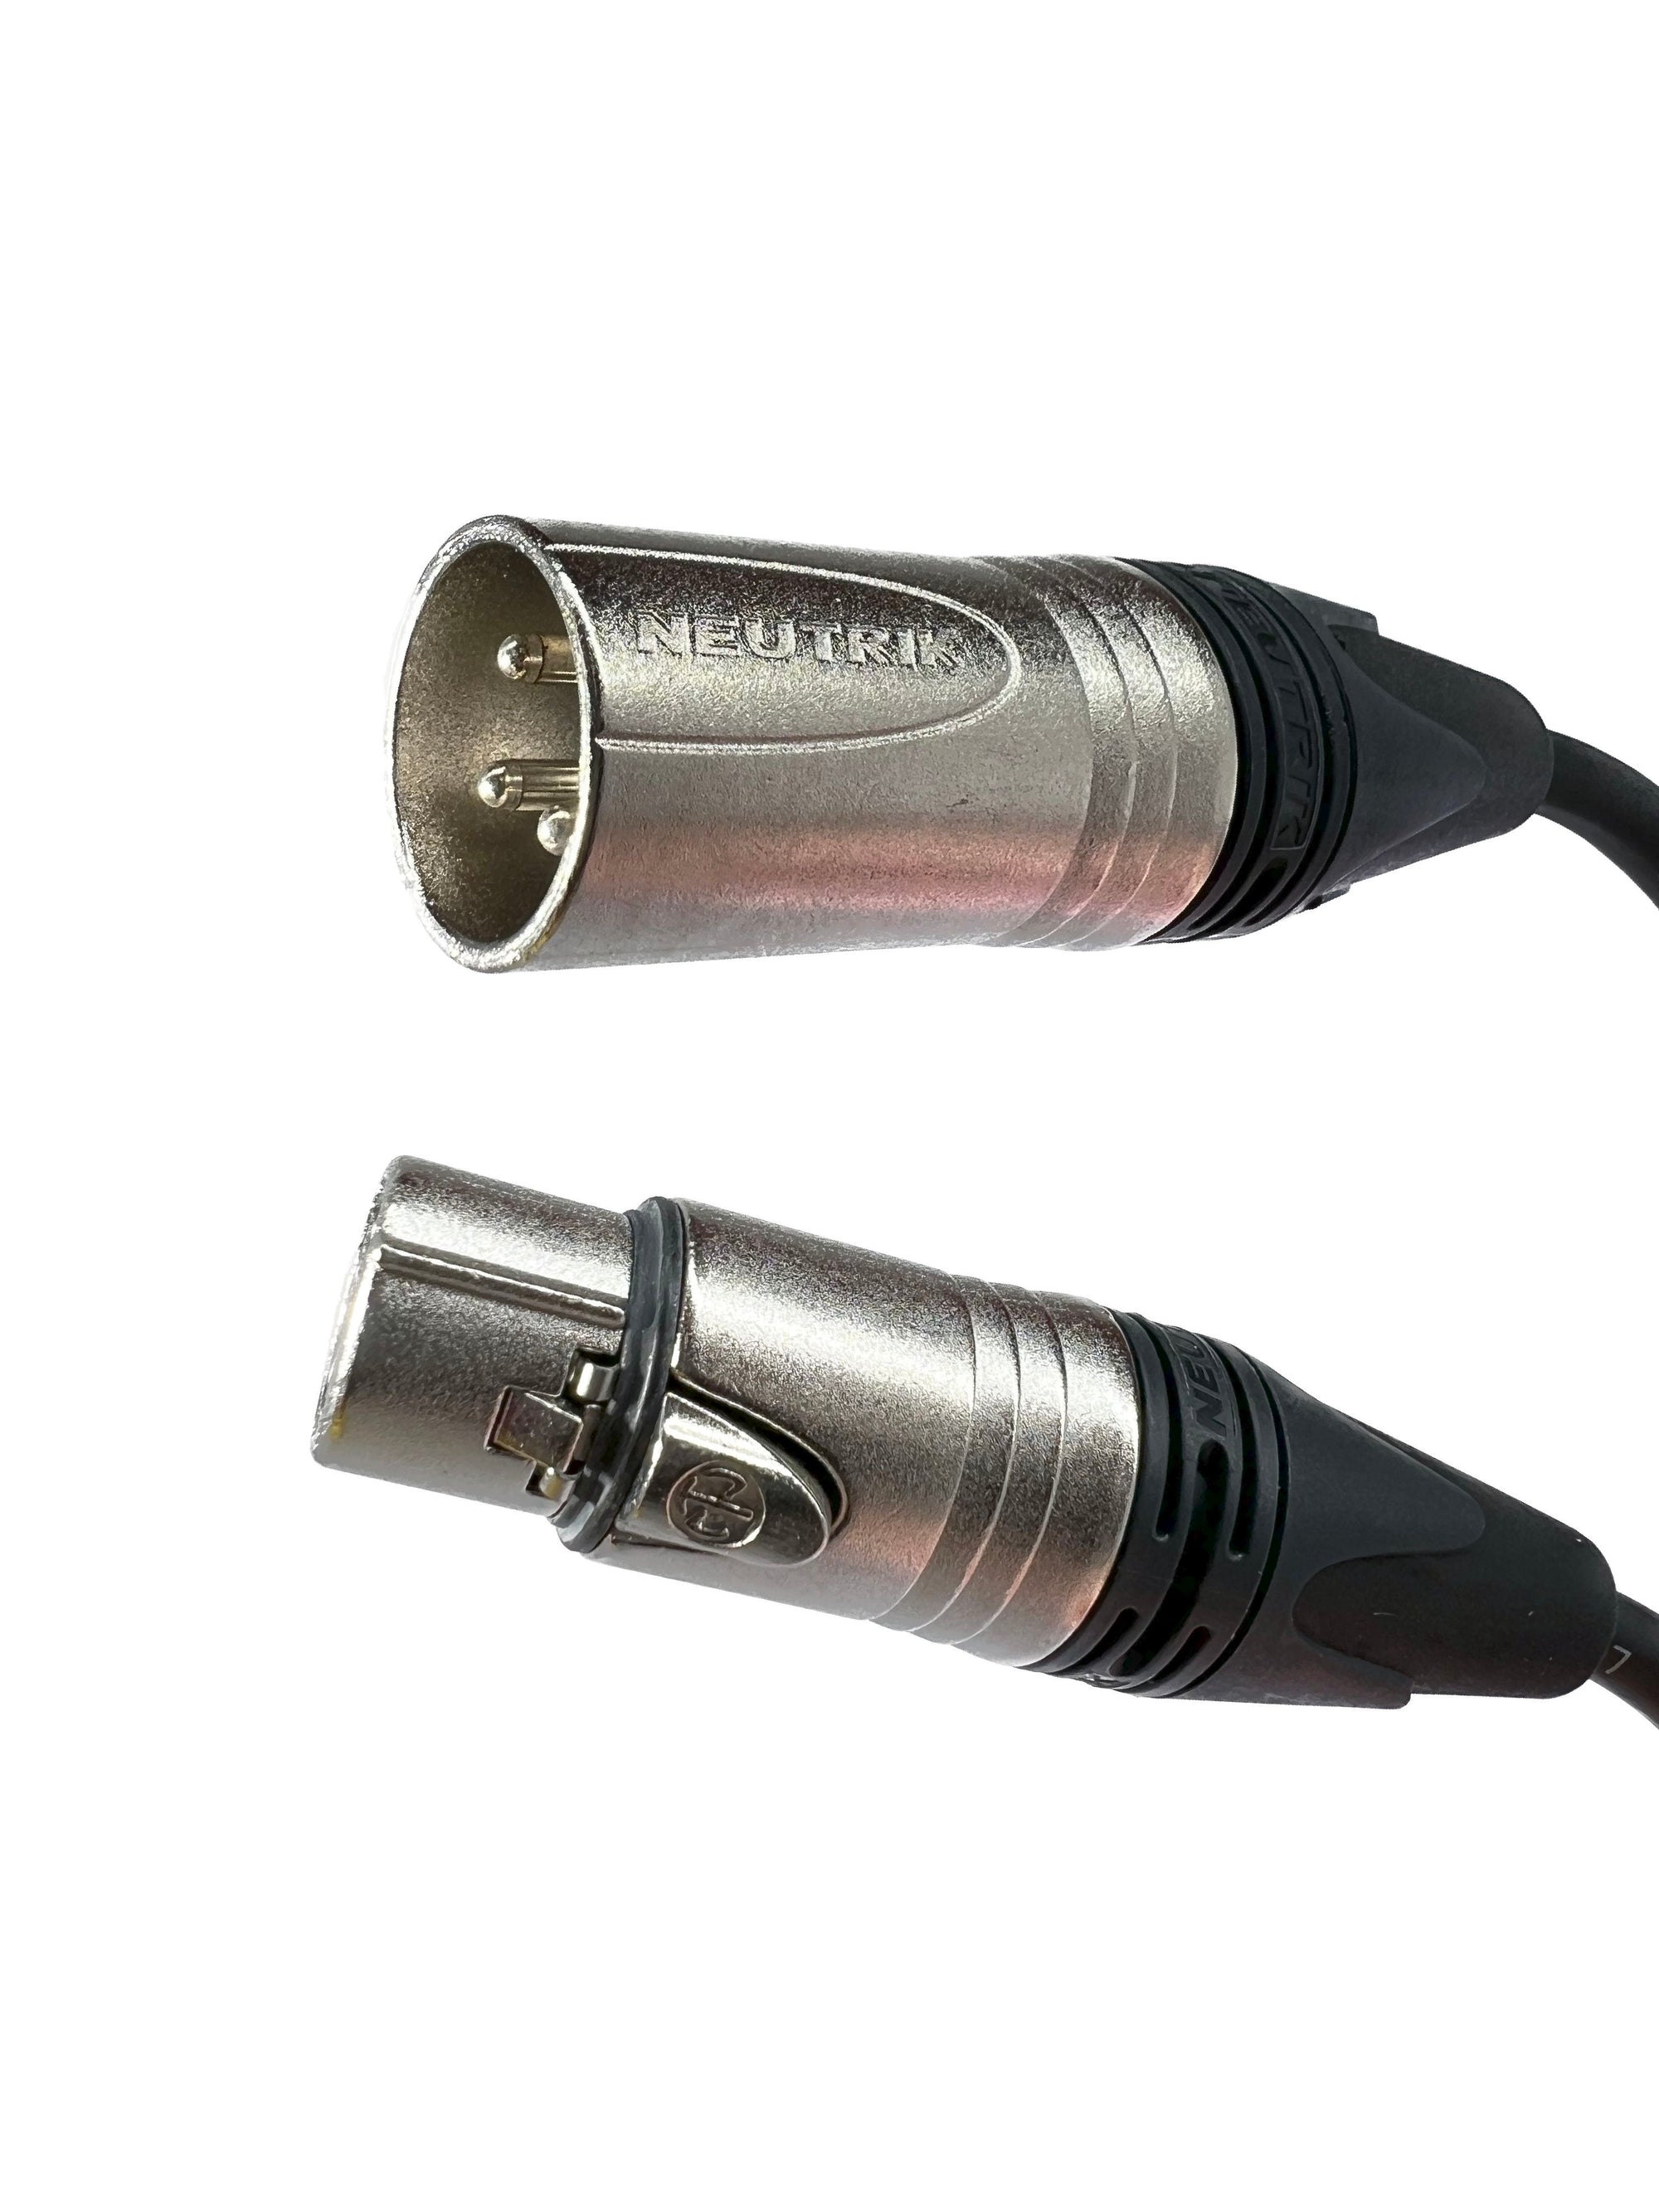 XLR 3 Pin to Blunt Installation Cable with Neutrik XLR Connectors (Male or  Female Options)